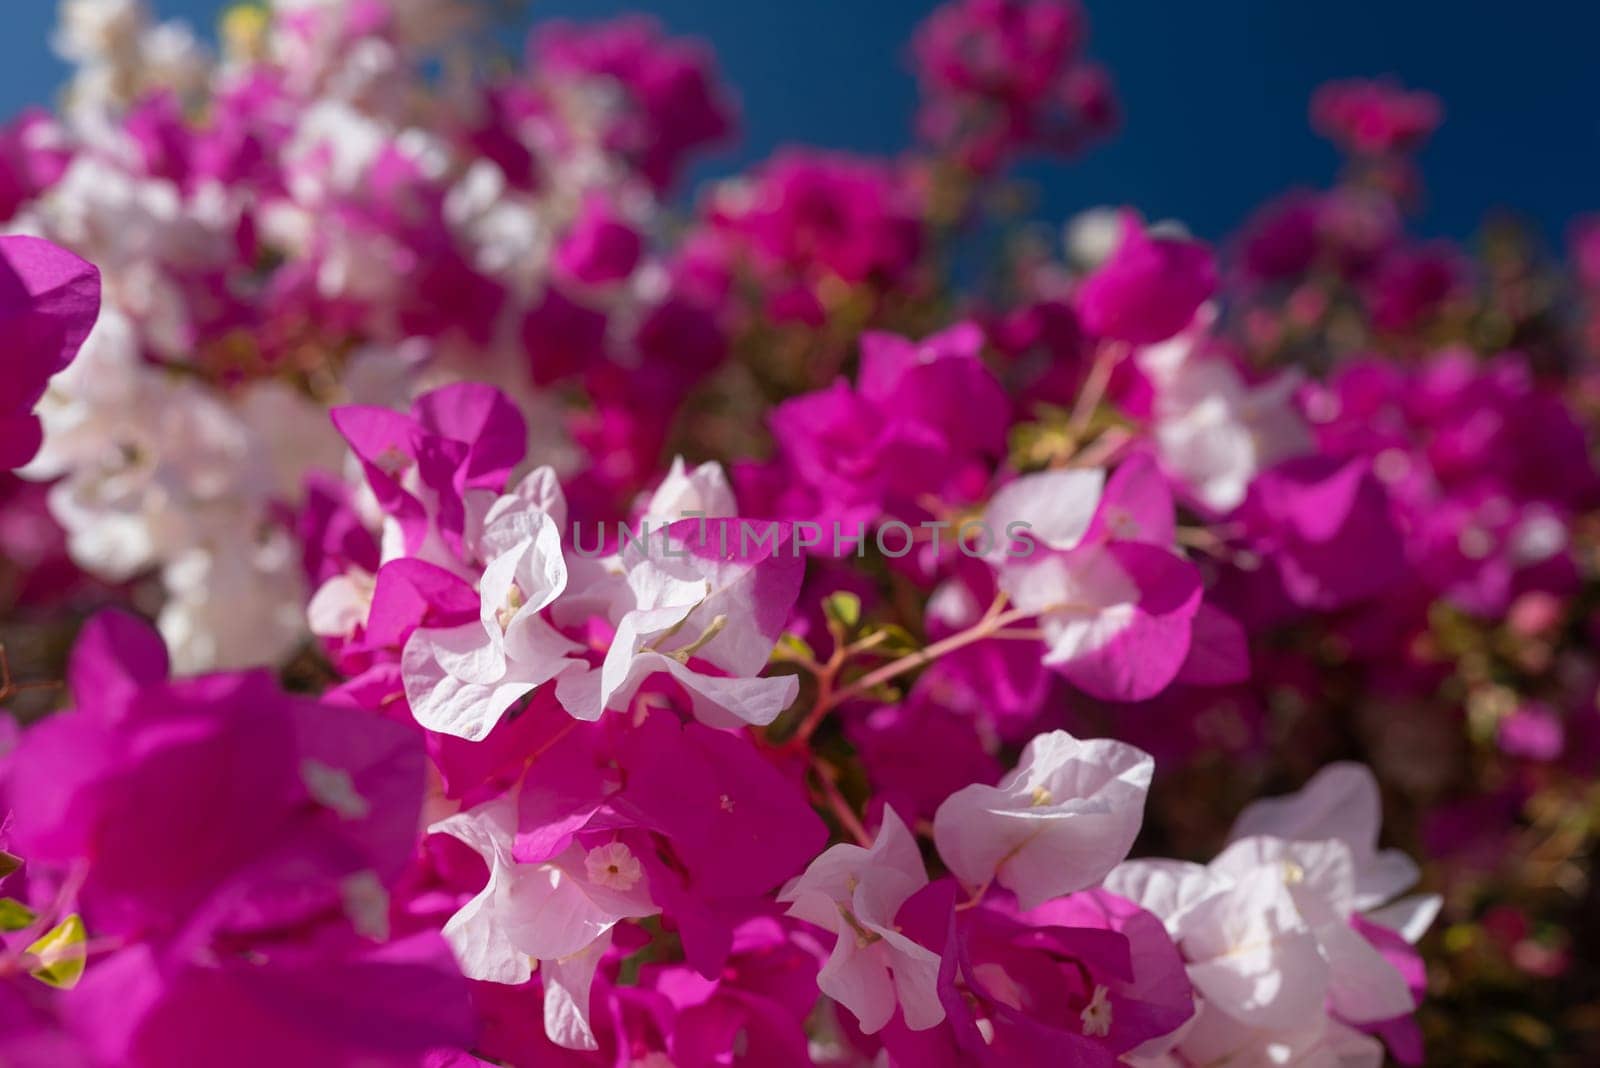 White and pink flowers of bougainvillea on blue sky background on a sunny day. Miss universe type. Sunlit pink flowers closeup. Exotic flora of Tenerife, Canary islands, Spain. Summer nature wallpaper